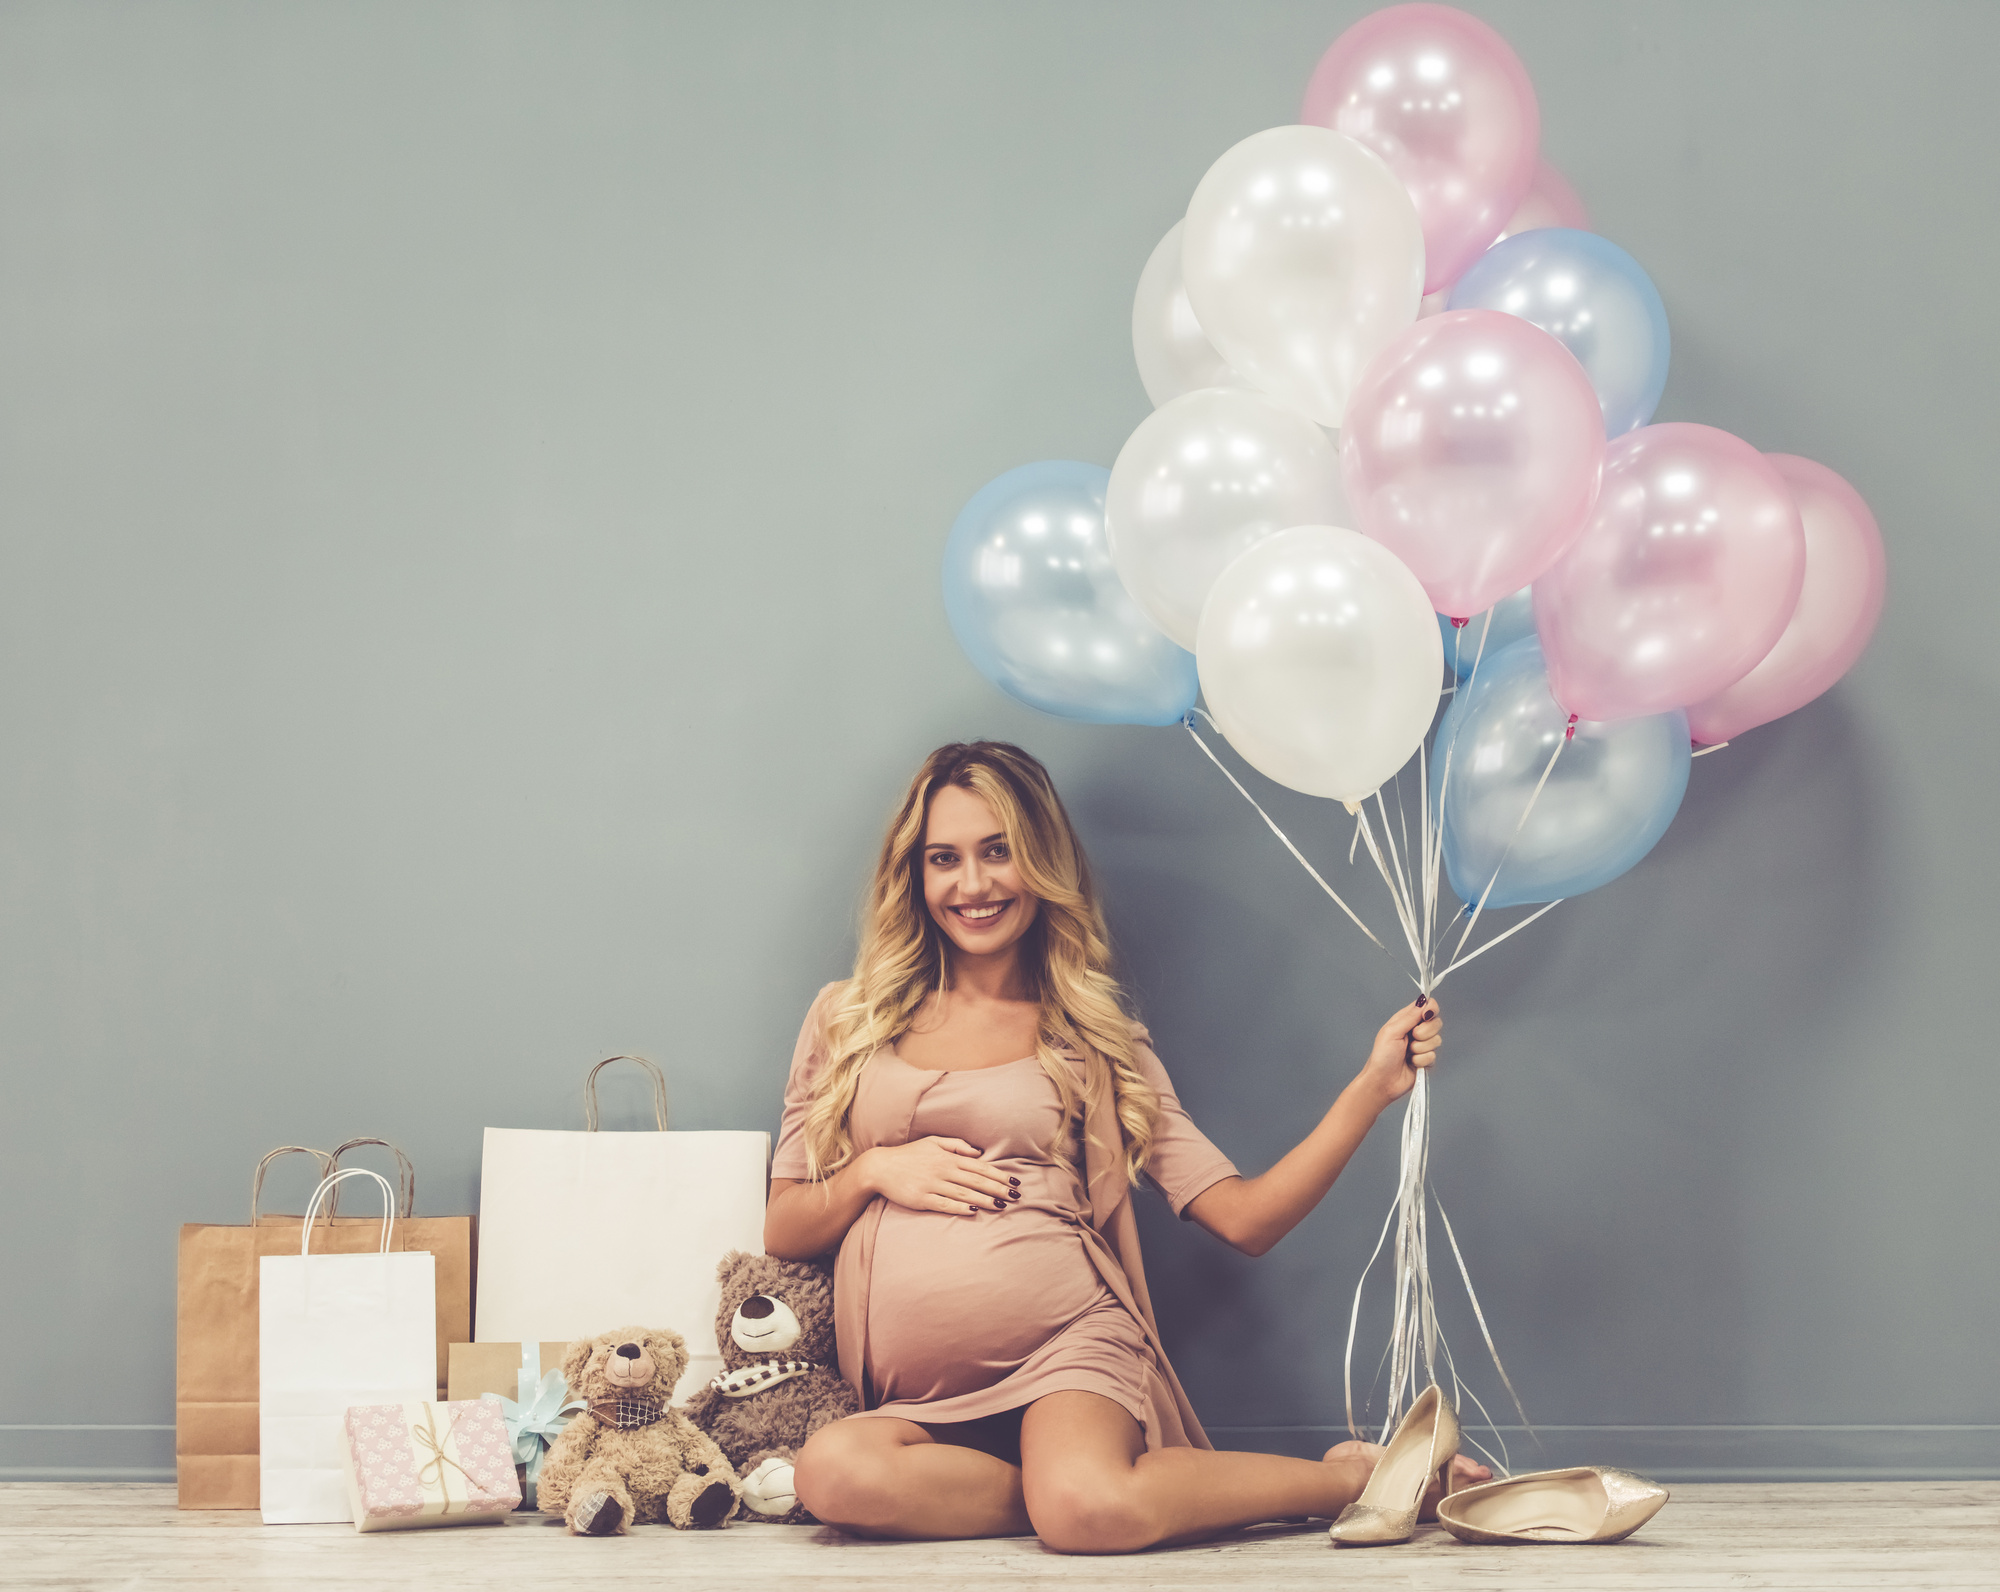 Every mother wants a happy and healthy pregnancy journey. Let us help you achieve this with these 5 pregnancy tips for first-time moms.